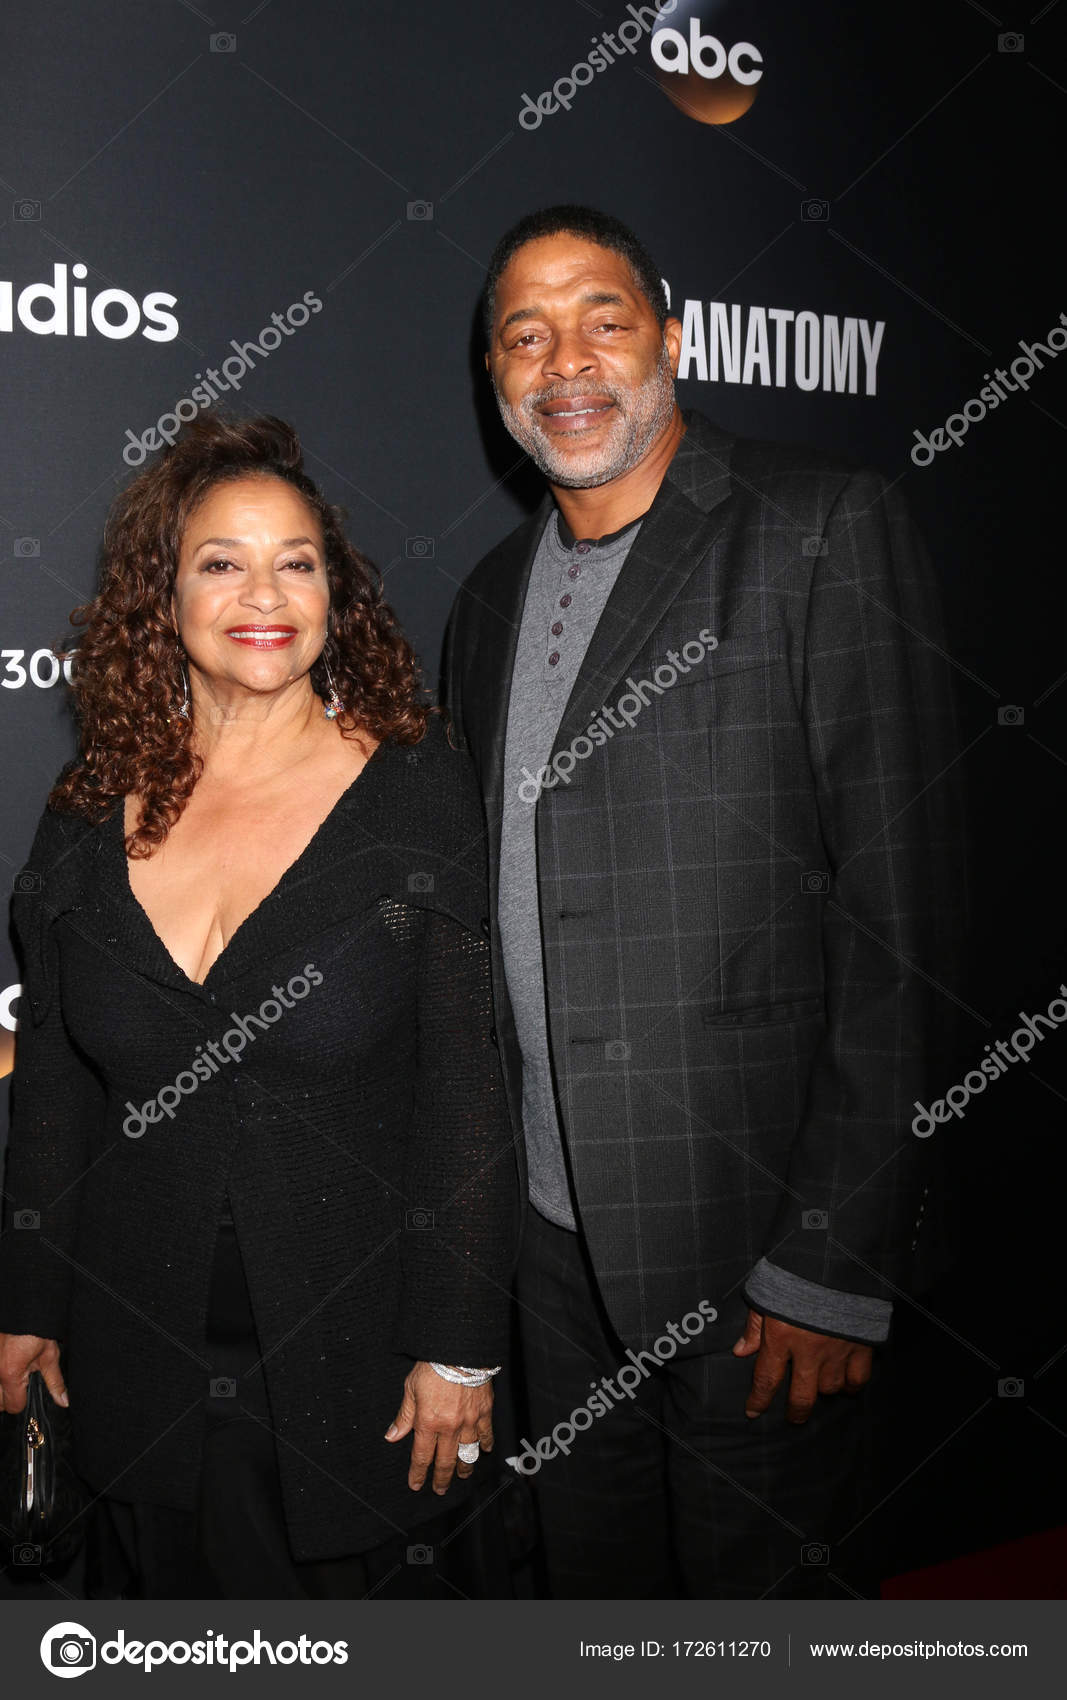 Norman Nixon Jr. and Debbie Allen attending the Paley Center for